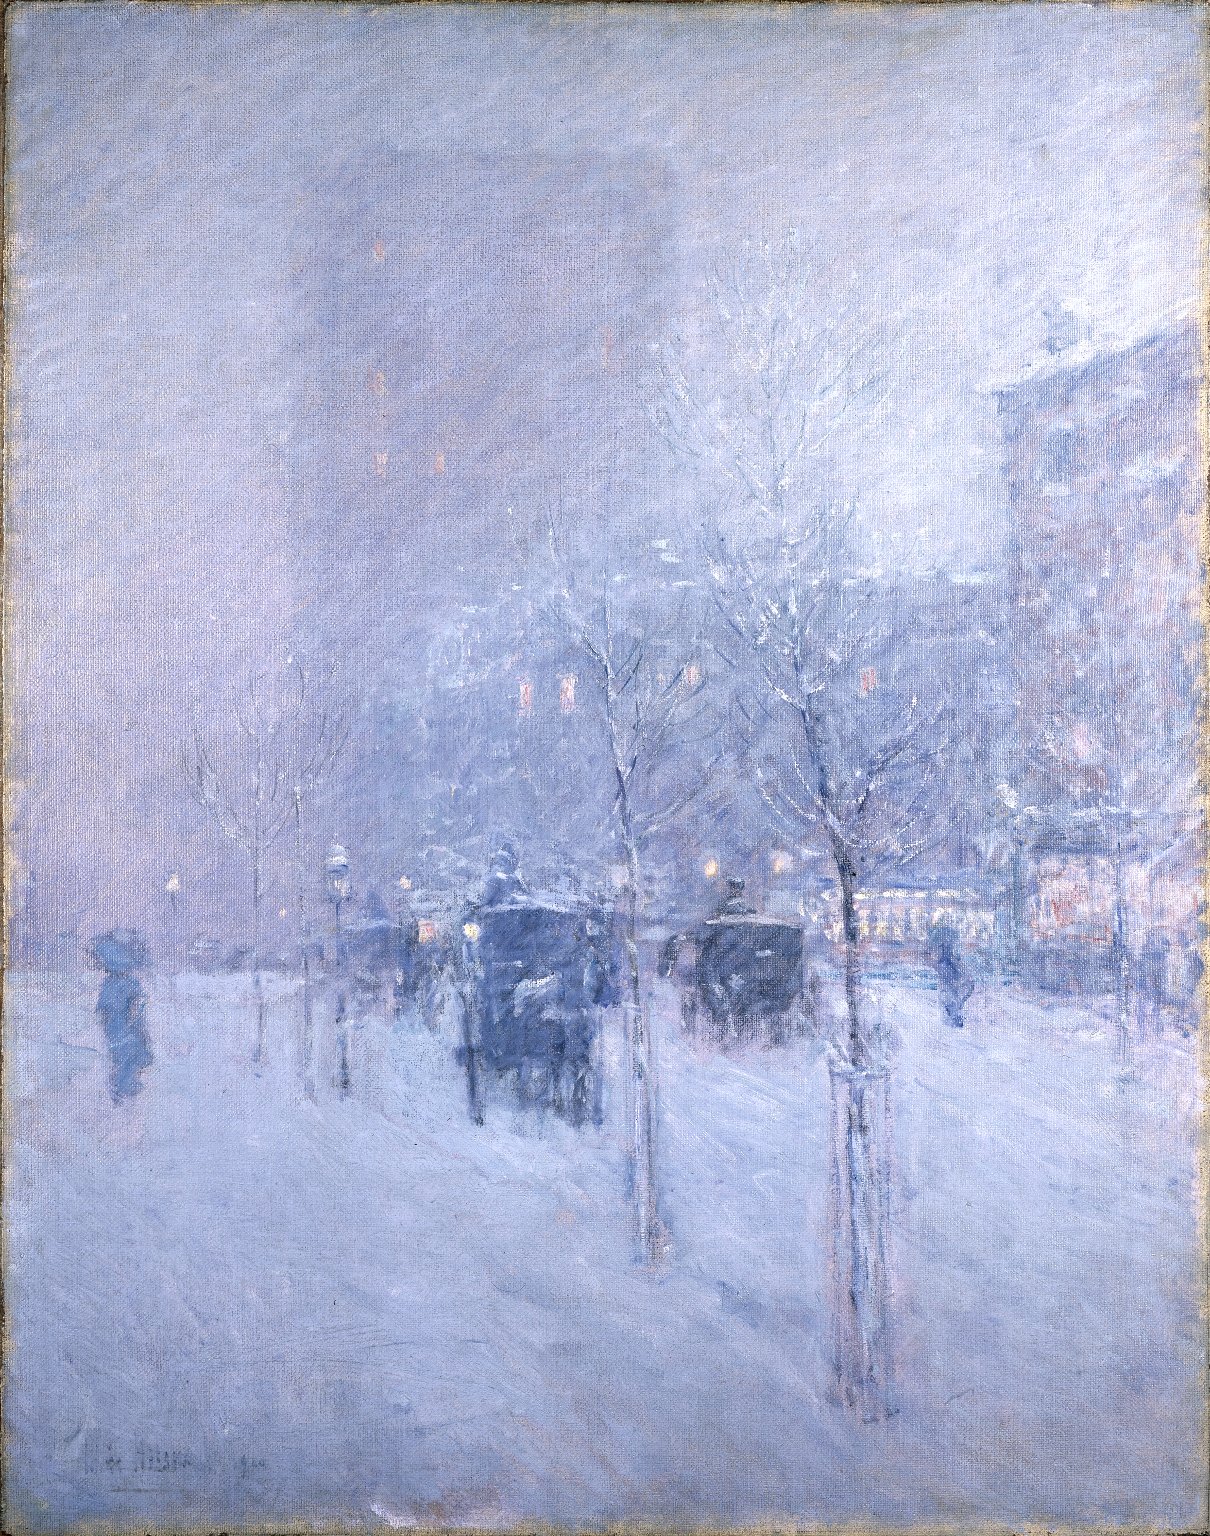 Late Afternoon, New York, Winter by Frederick Childe Hassam - 1900 - 93.8 x 73.7 cm Brooklyn Museum